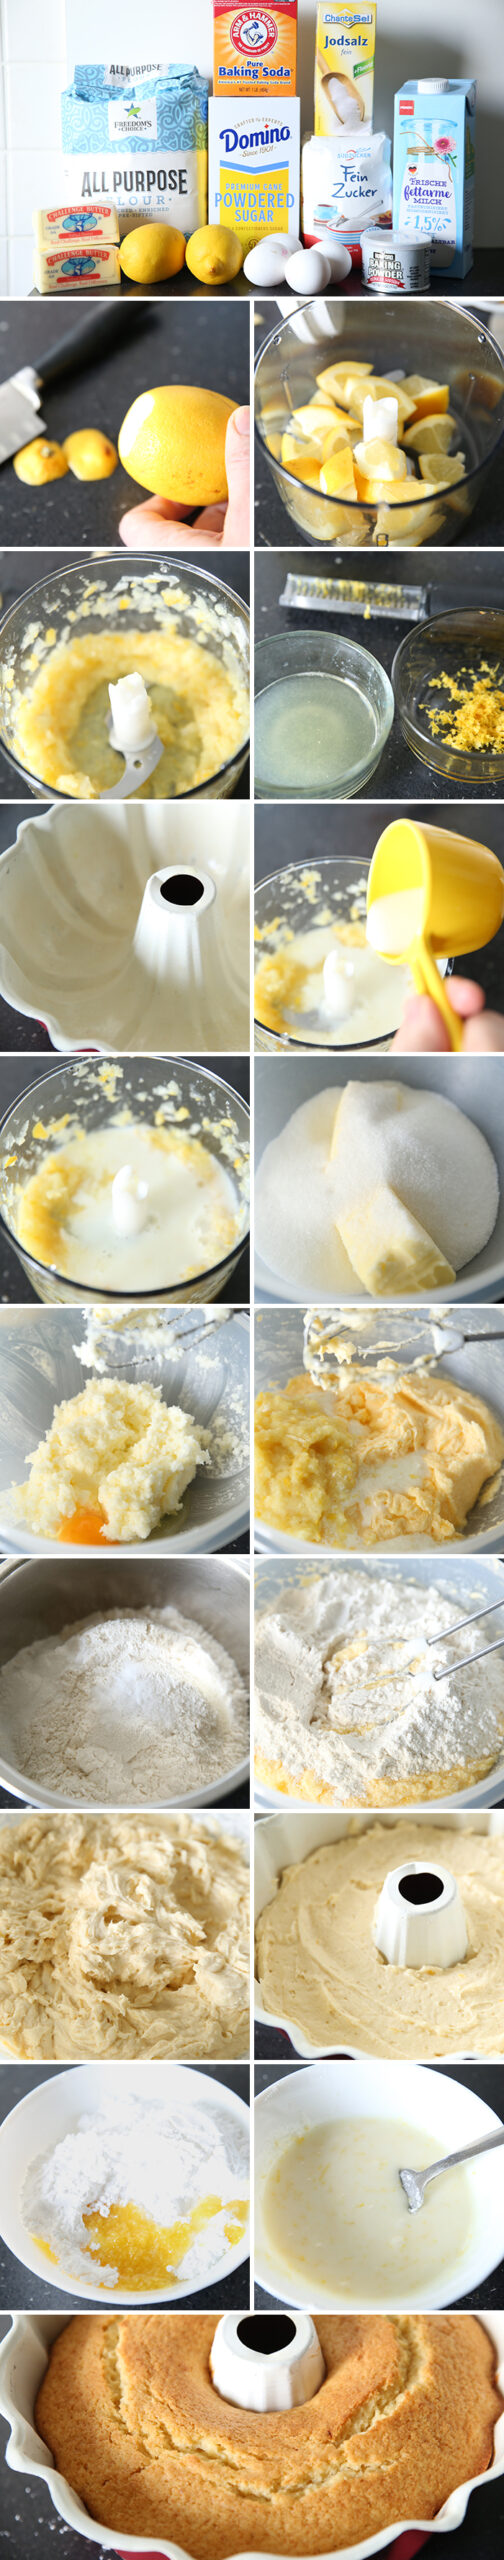 18-photo picture collage of step-by-step pictures on how to make Whole Lemon Bundt Cake.